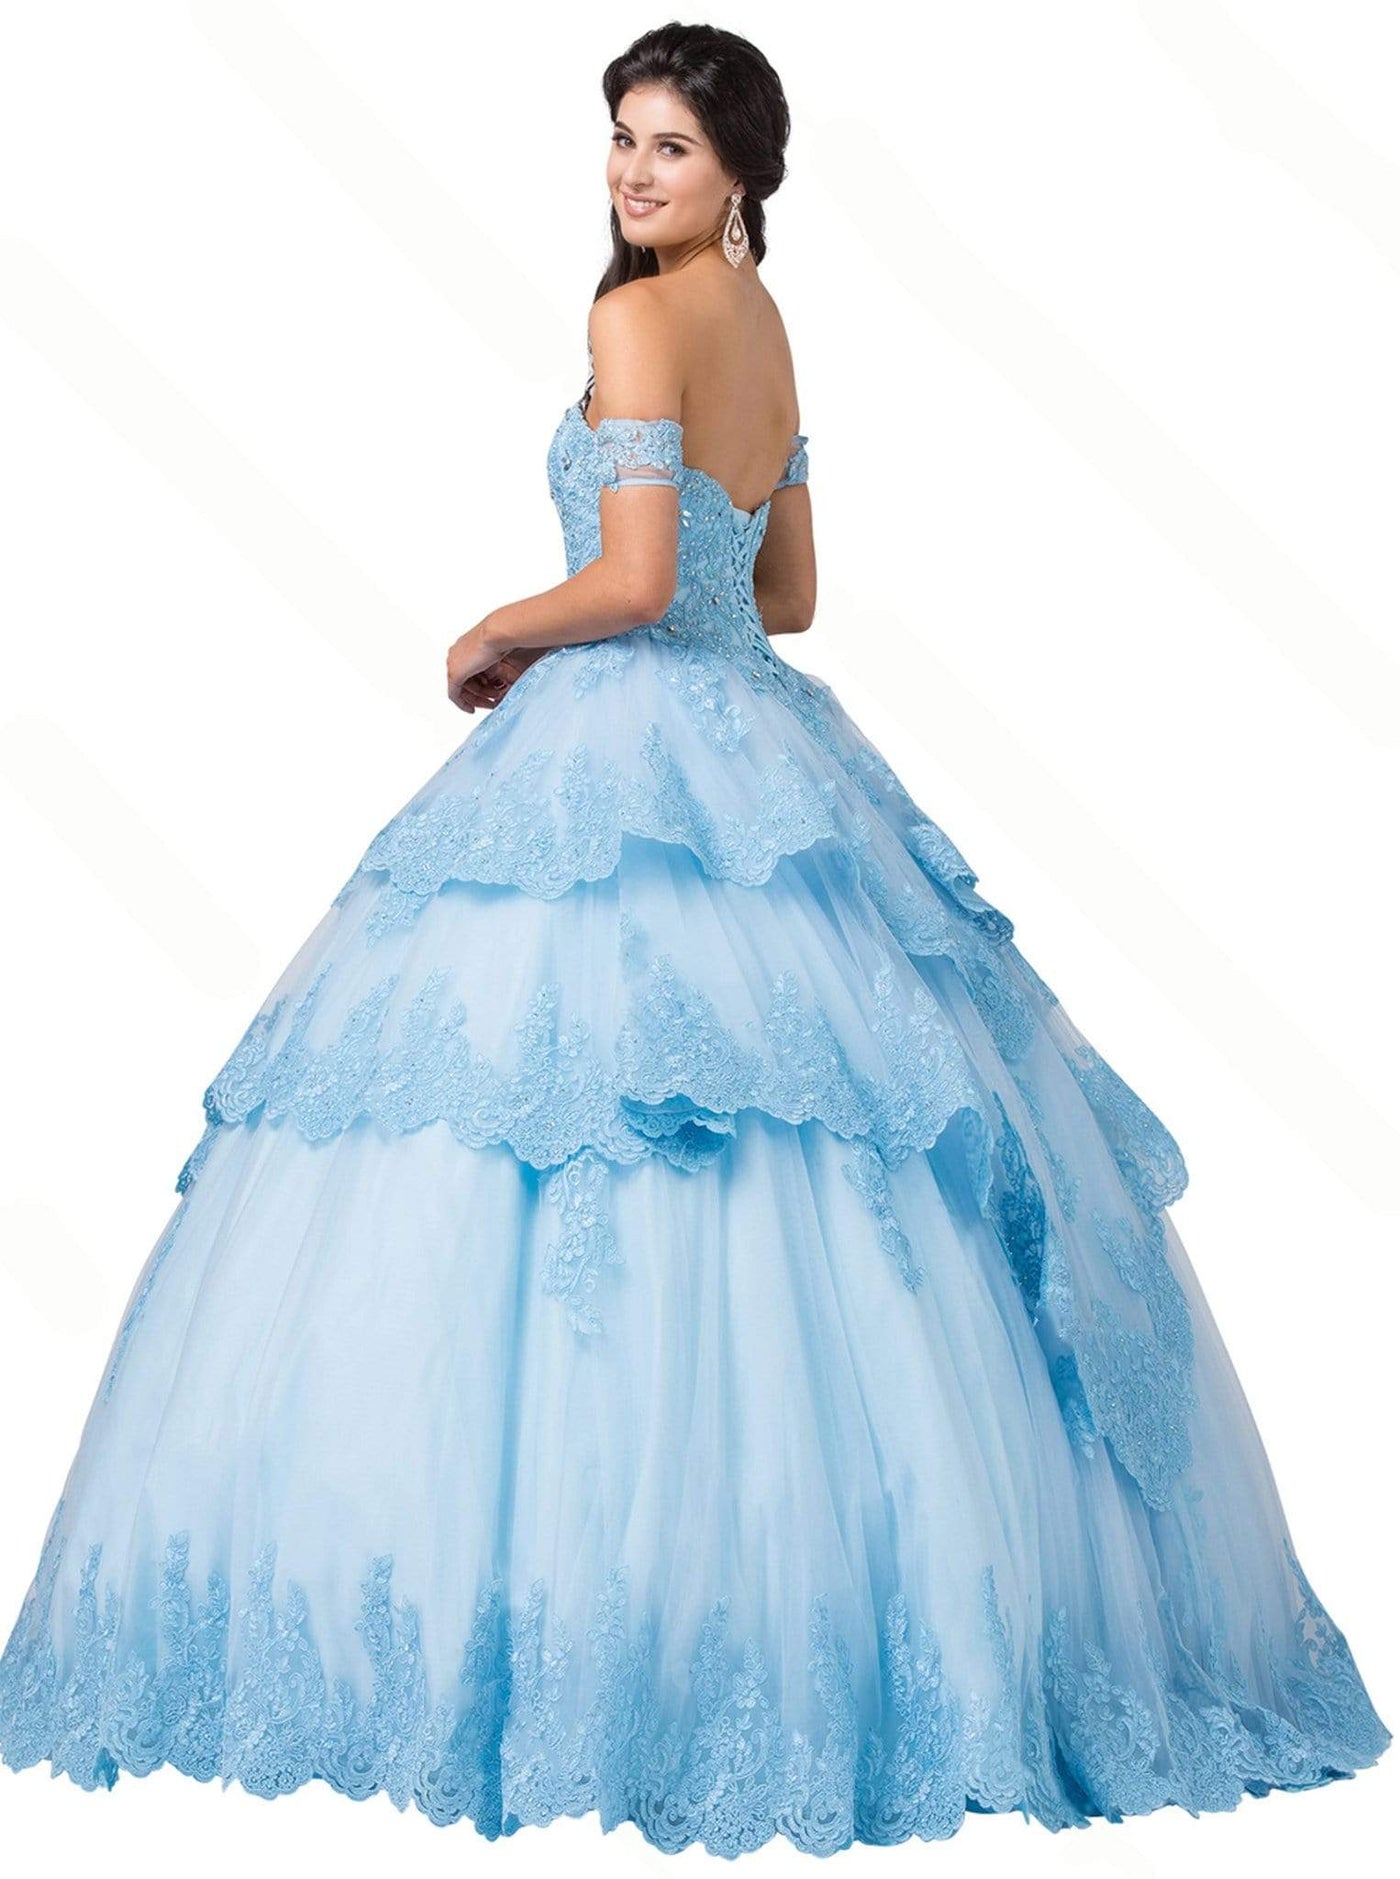 Dancing Queen - 1404 Strapless Sweetheart Tiered Scallop Hem Ballgown Special Occasion Dress